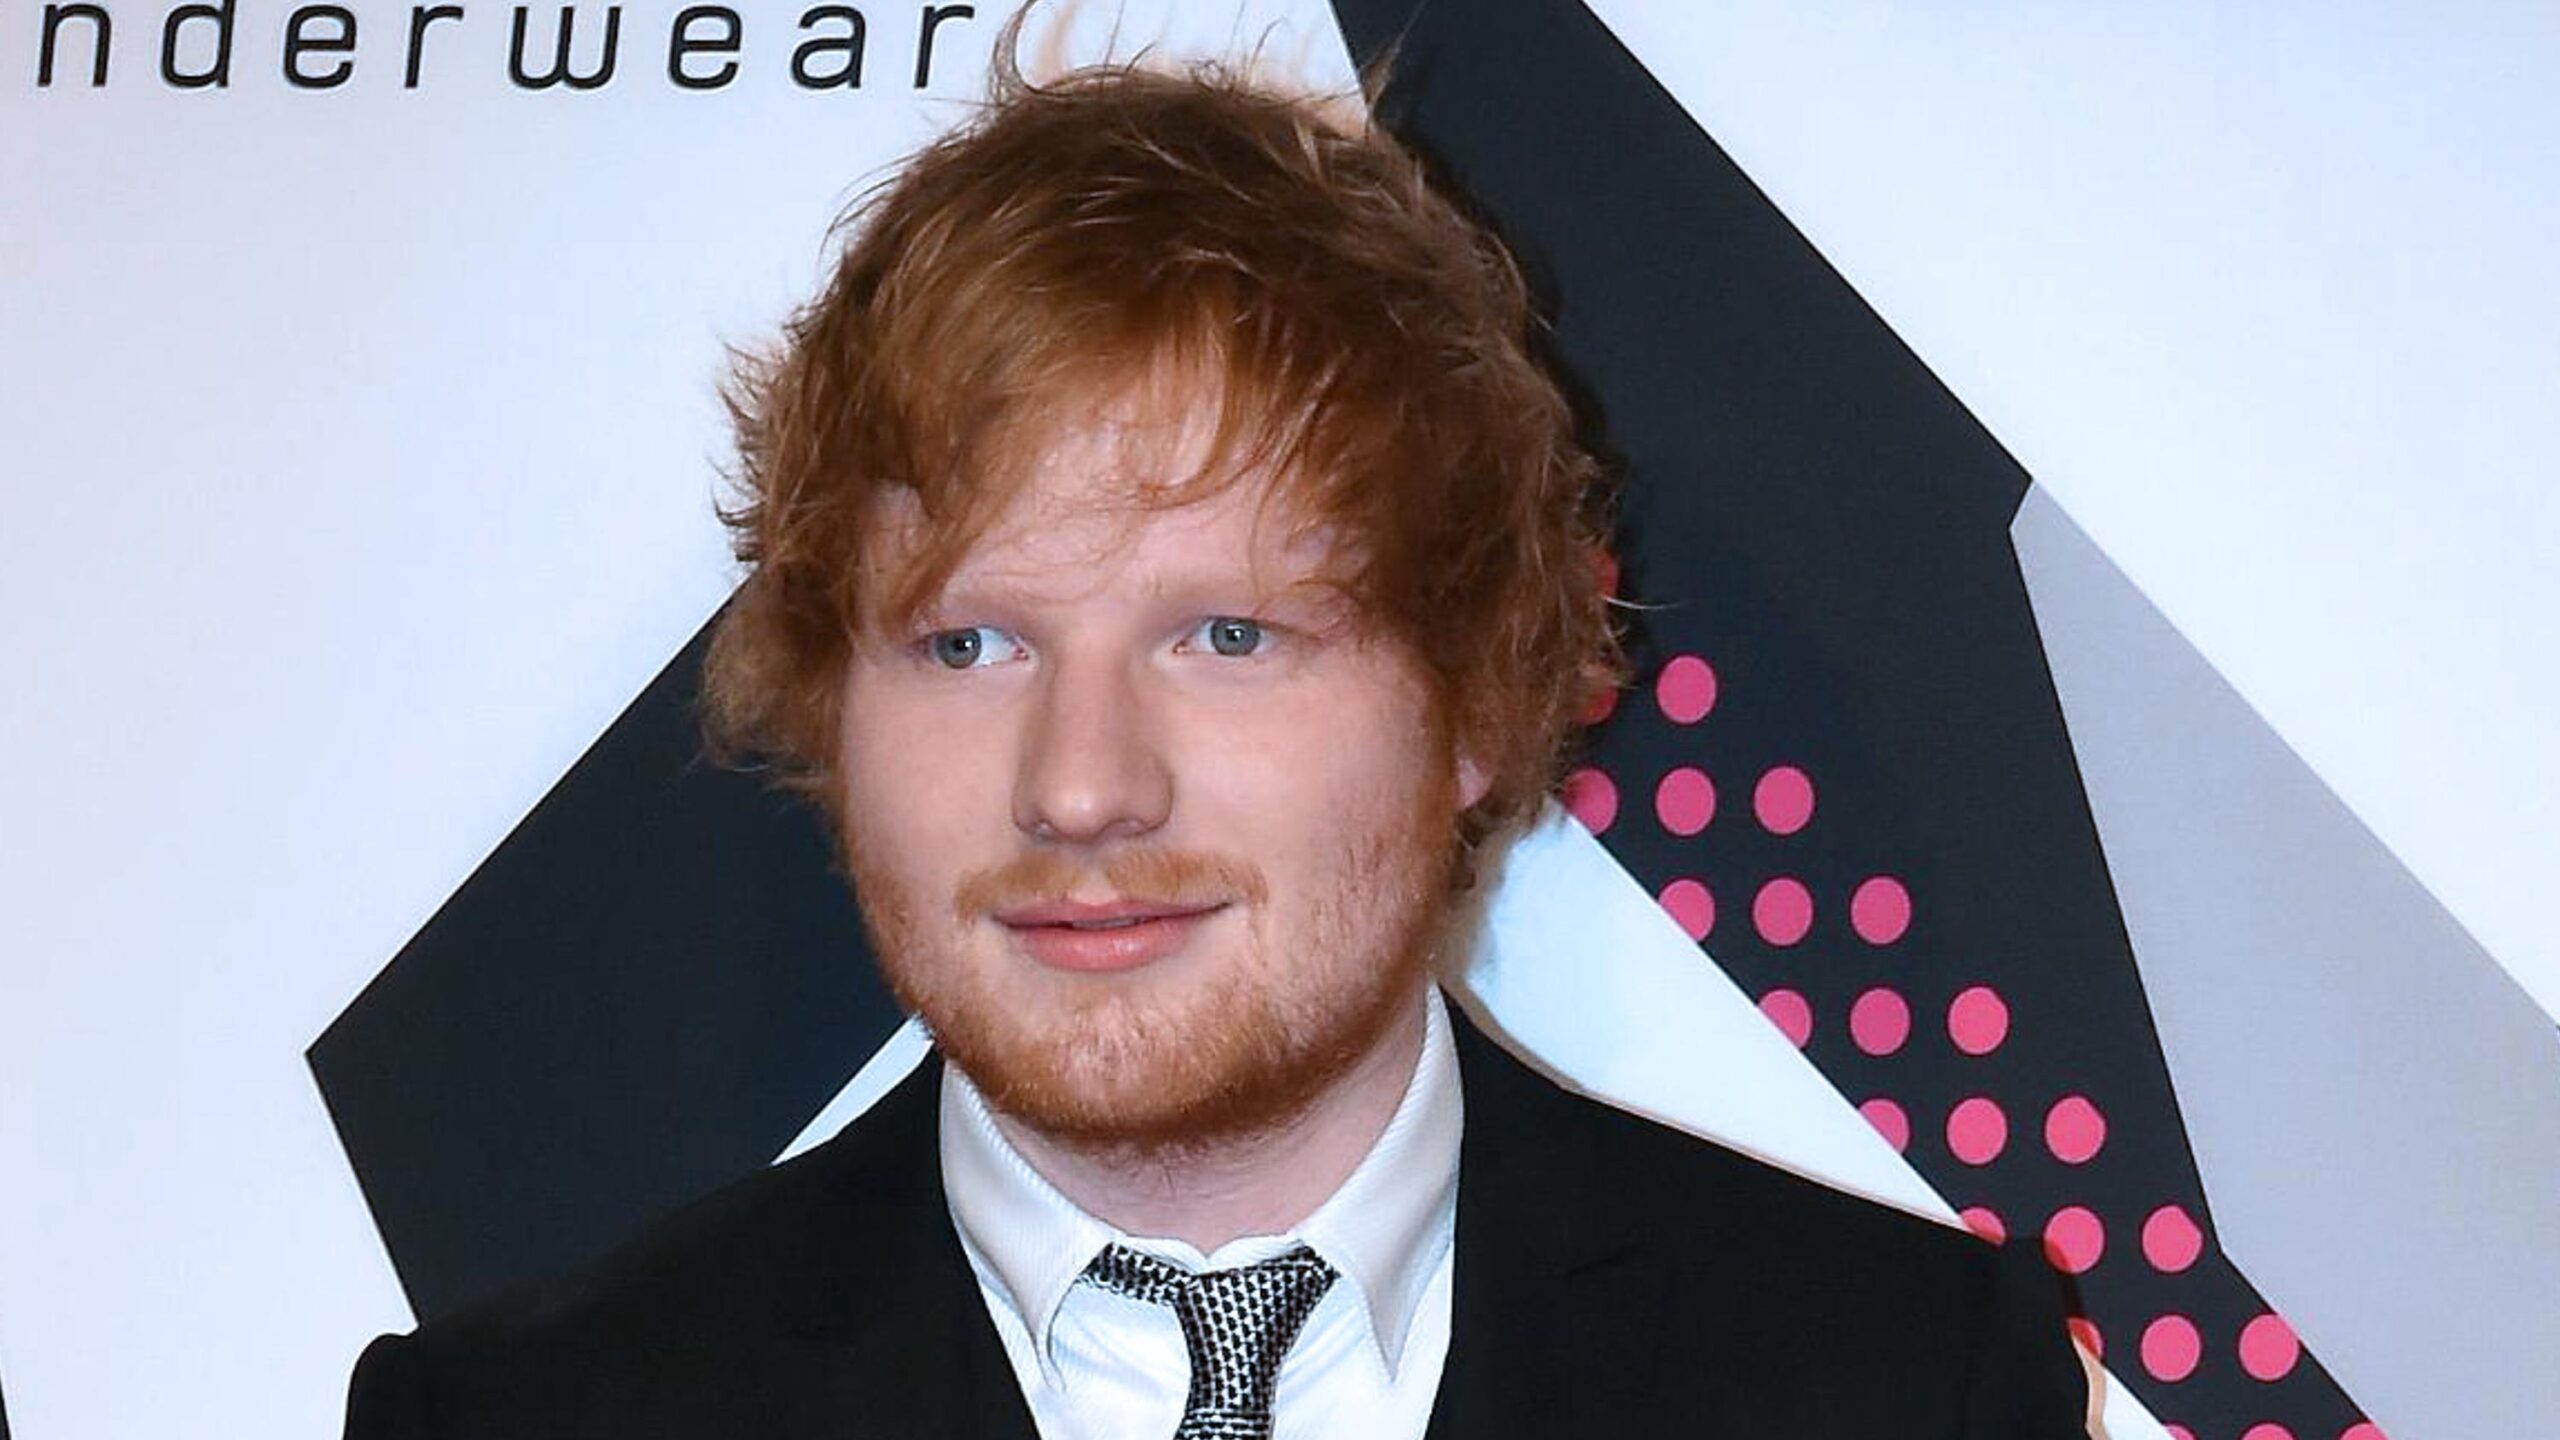 Ed Sheeran sued for allegedly copying Marvin Gaye’s song – reports